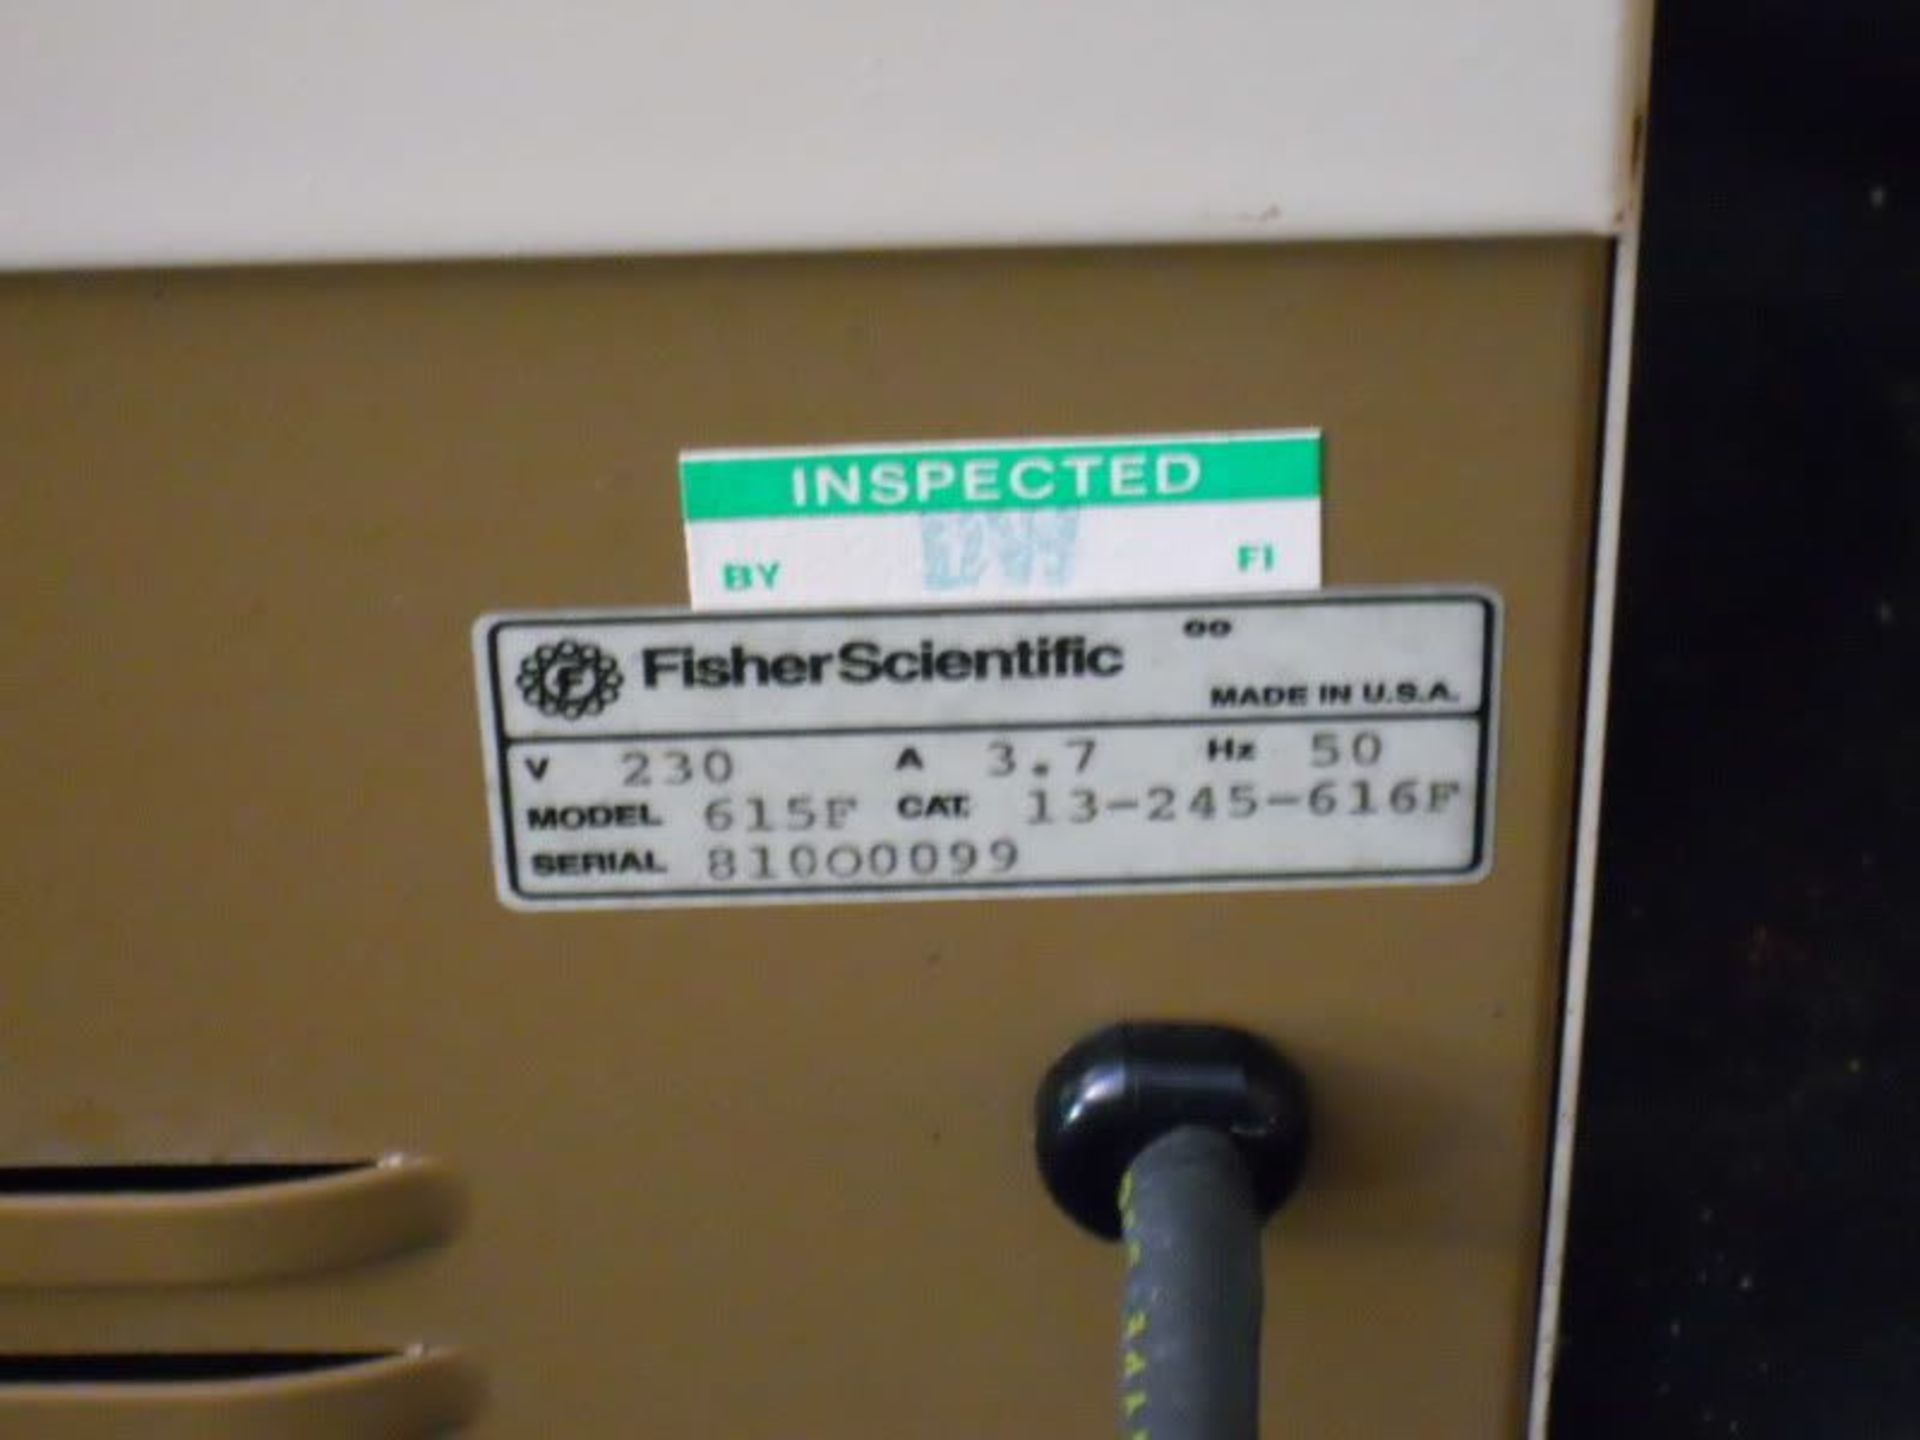 Fisher Scientific Isotemp Oven Model 615F (Parts), Qty 1, 320952762764 - Image 11 of 11